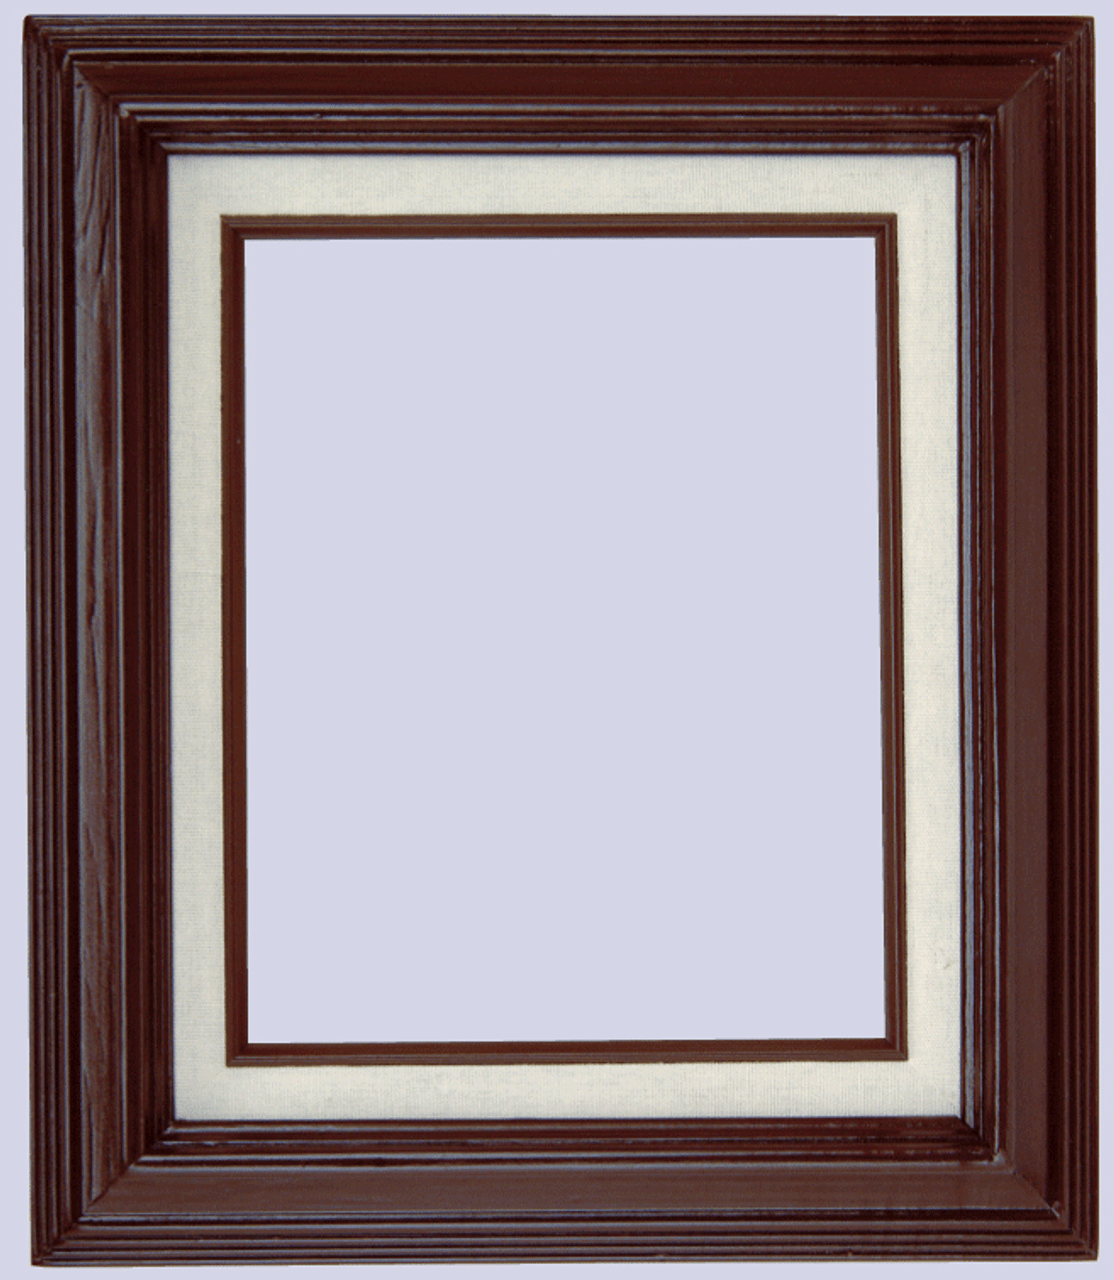 3 Inch Econo Wood Frames With Linen Liners: 8.5X11*